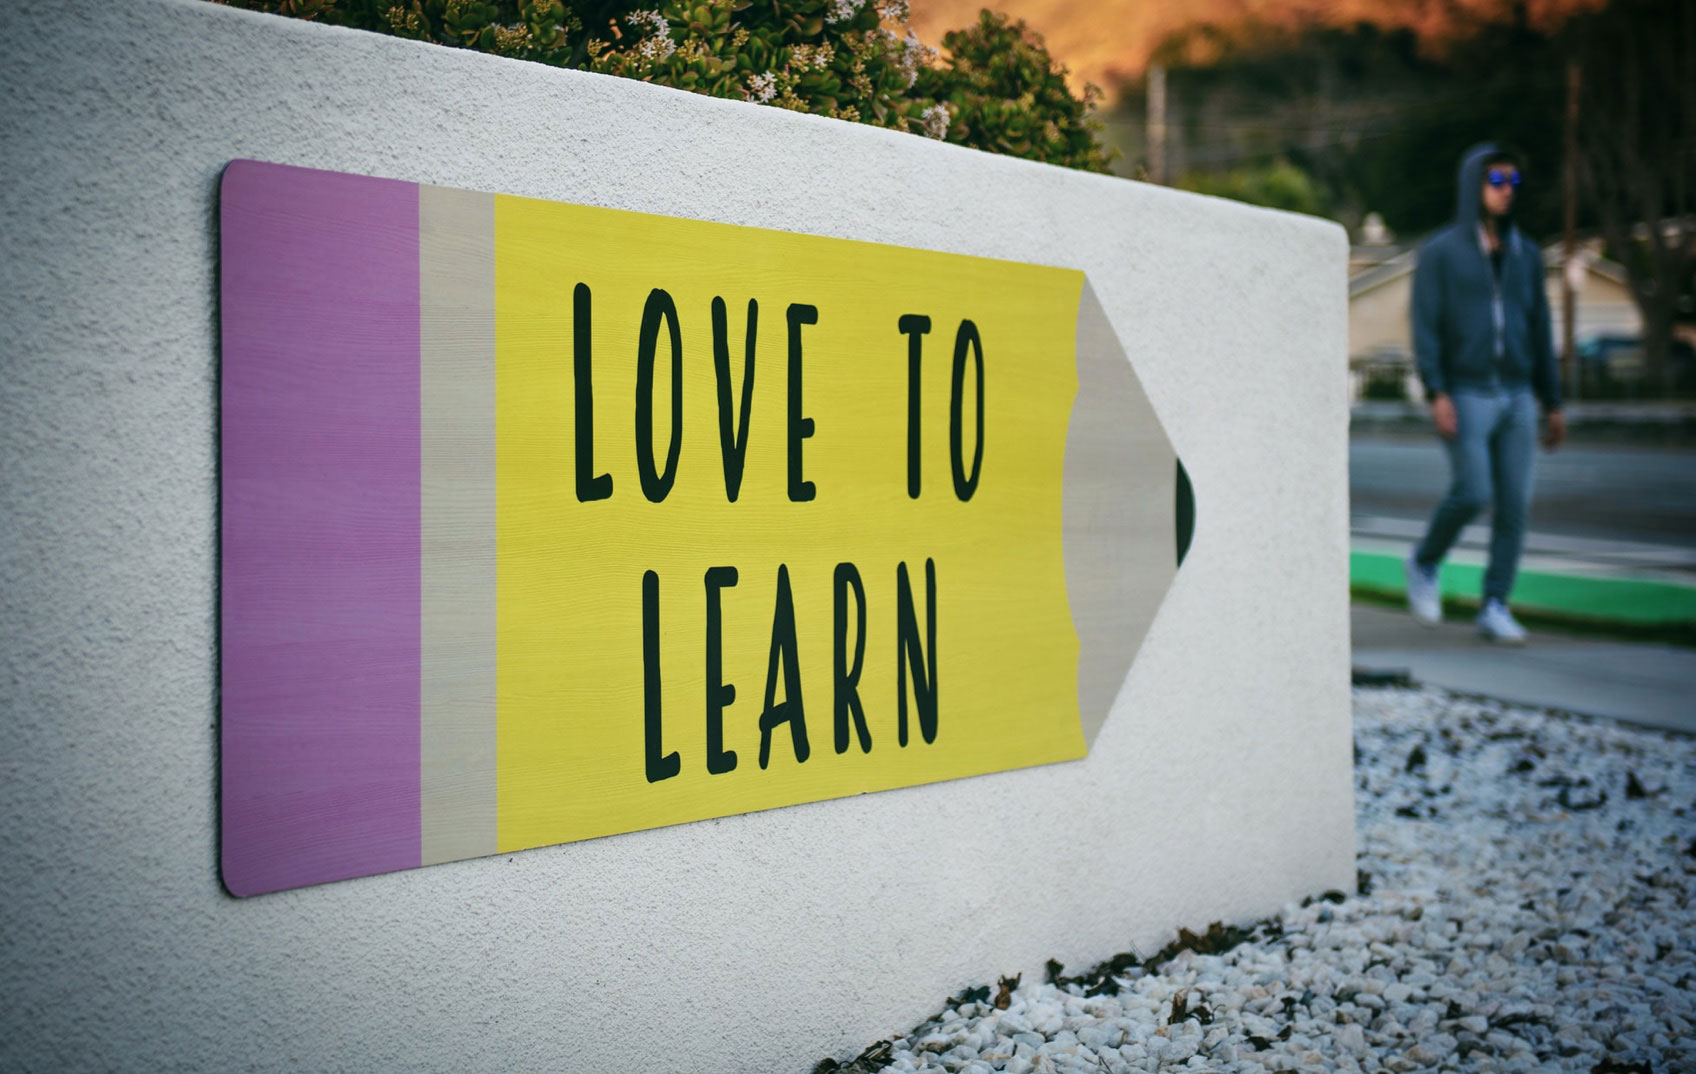 An outdoor sign in the shape of a pencil with the words 'LOVE TO LEARN' written on it